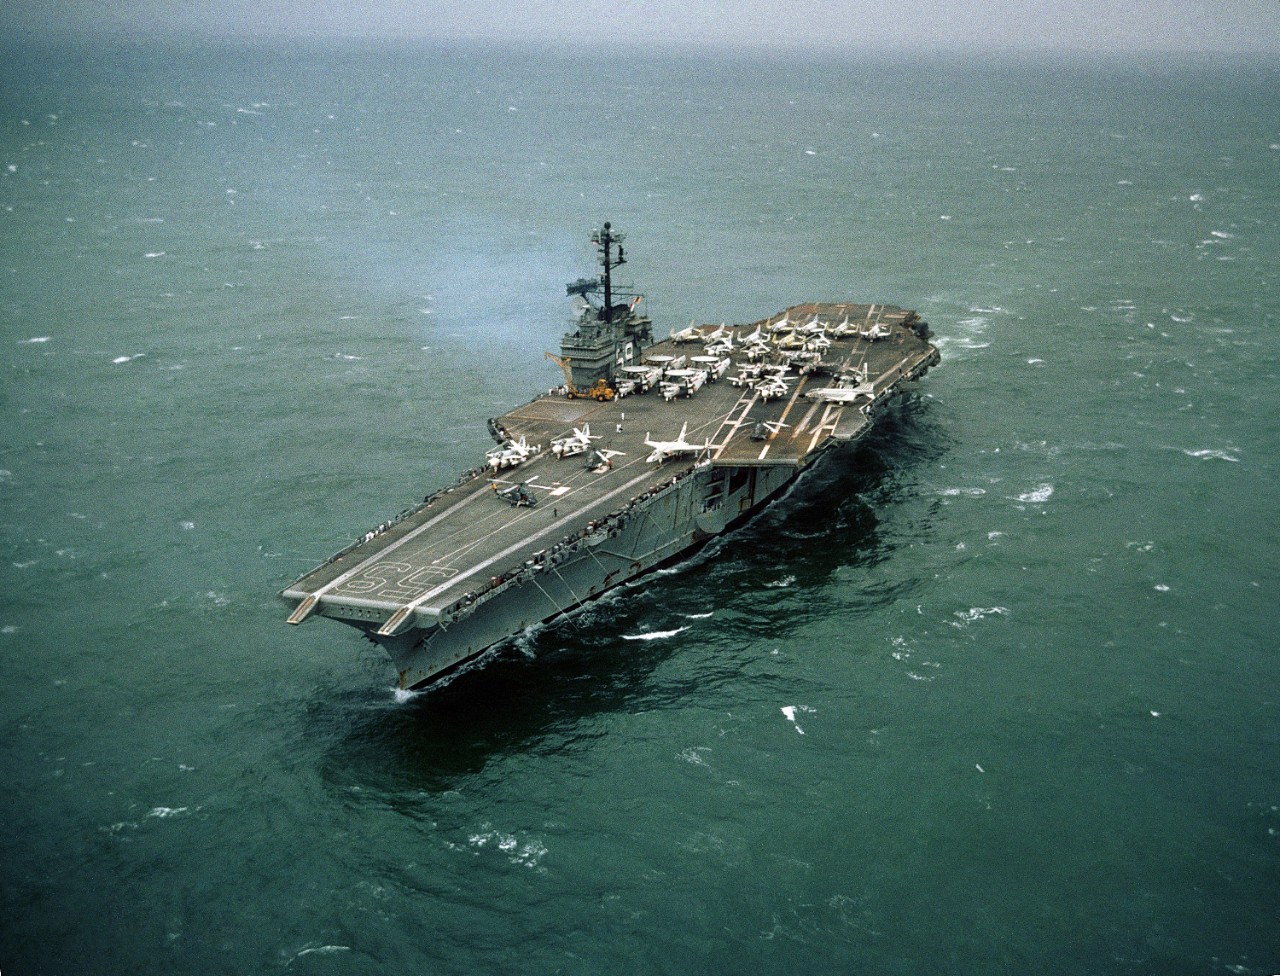 330-CFD-DN-SC-04-09140:  USS Forrestal (CVA-59), 1967.  An aerial port bow view of the Forrestal Class Aircraft Carrier, USS Forrestal (CVA 59) underway approximately one month after fires and explosions damaged the ship leaving 132 crewmen dead, 62 injured, and two missing and presumed dead while on duty in waters off Vietnam. The Forrestal is homeport at Norfolk, Virginia, August 12, 1967.  PHC H.L. Wise, USN.  Official U.S. Navy Photograph, now in the collections of the National Archives.    